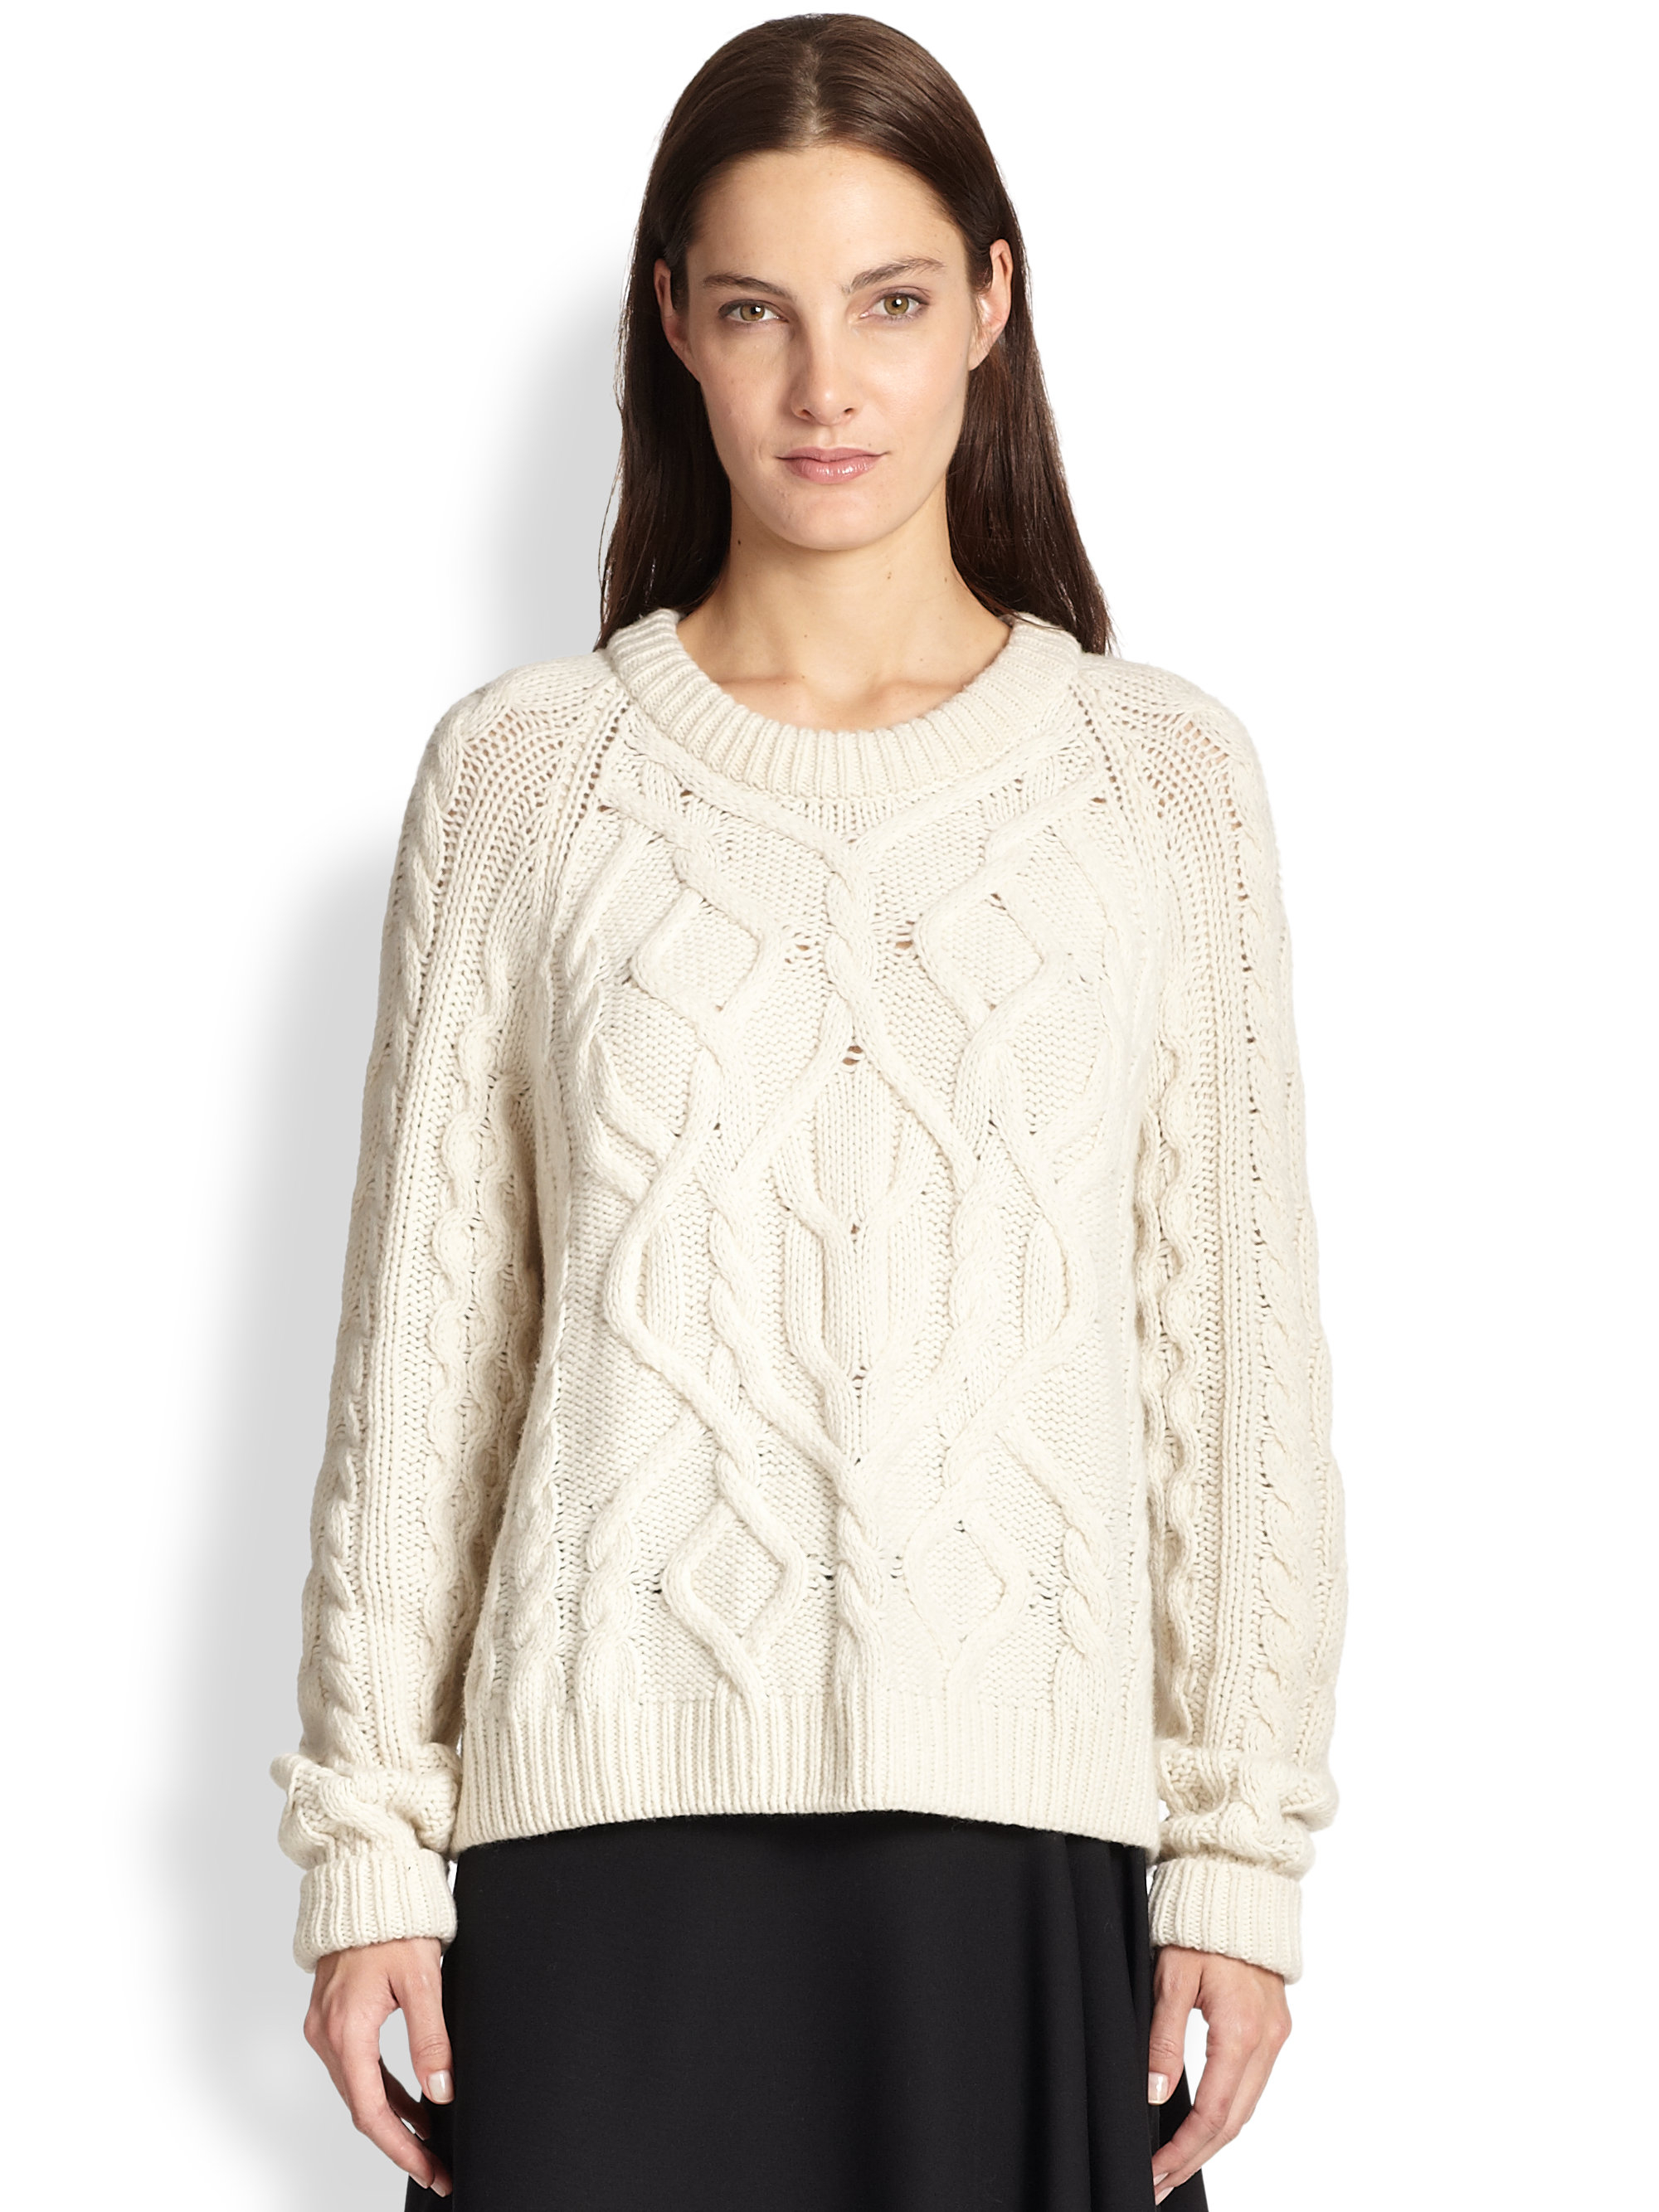 Mcq Wool & Cashmere Cable-Knit Sweater in White | Lyst